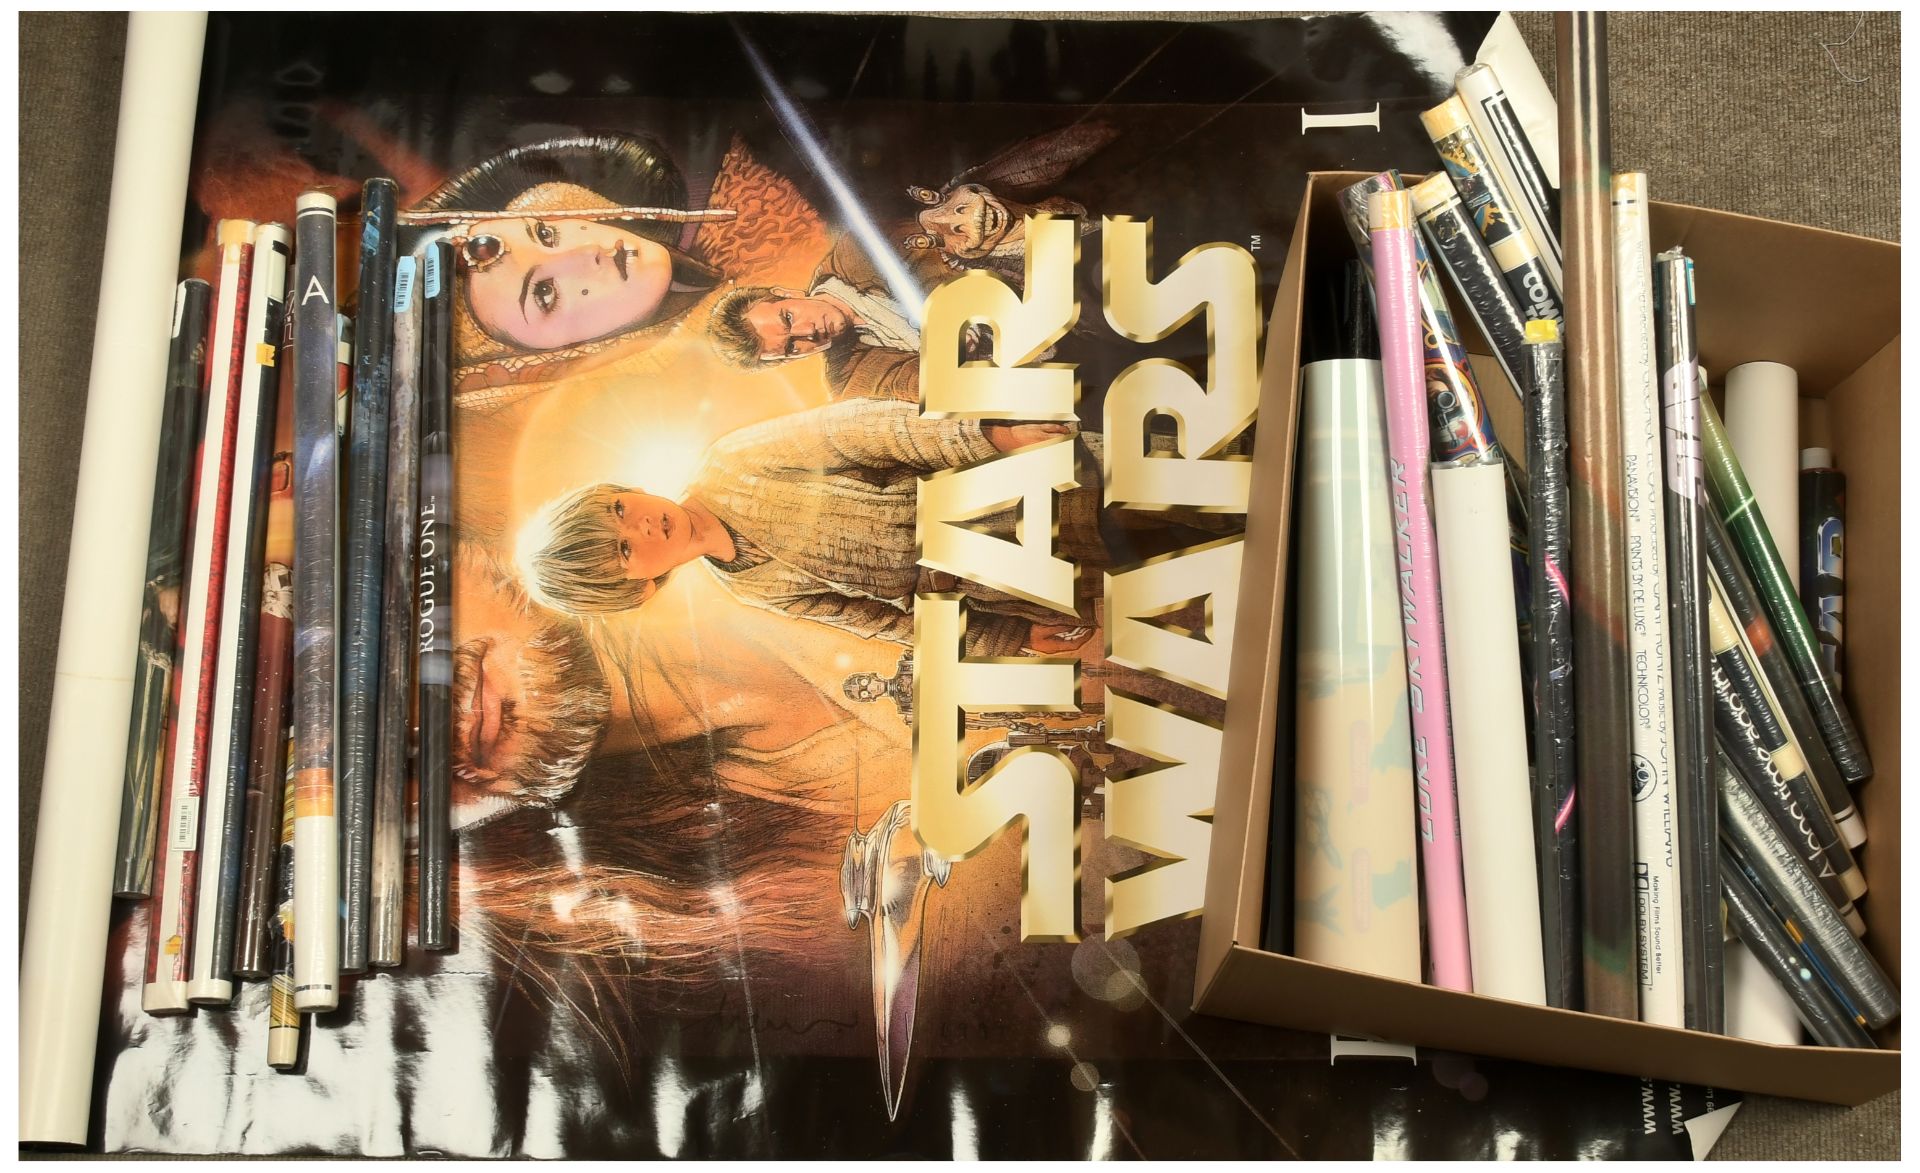 Large quantity of Star Wars modern issue posters, pictures, standees and others - Image 2 of 2